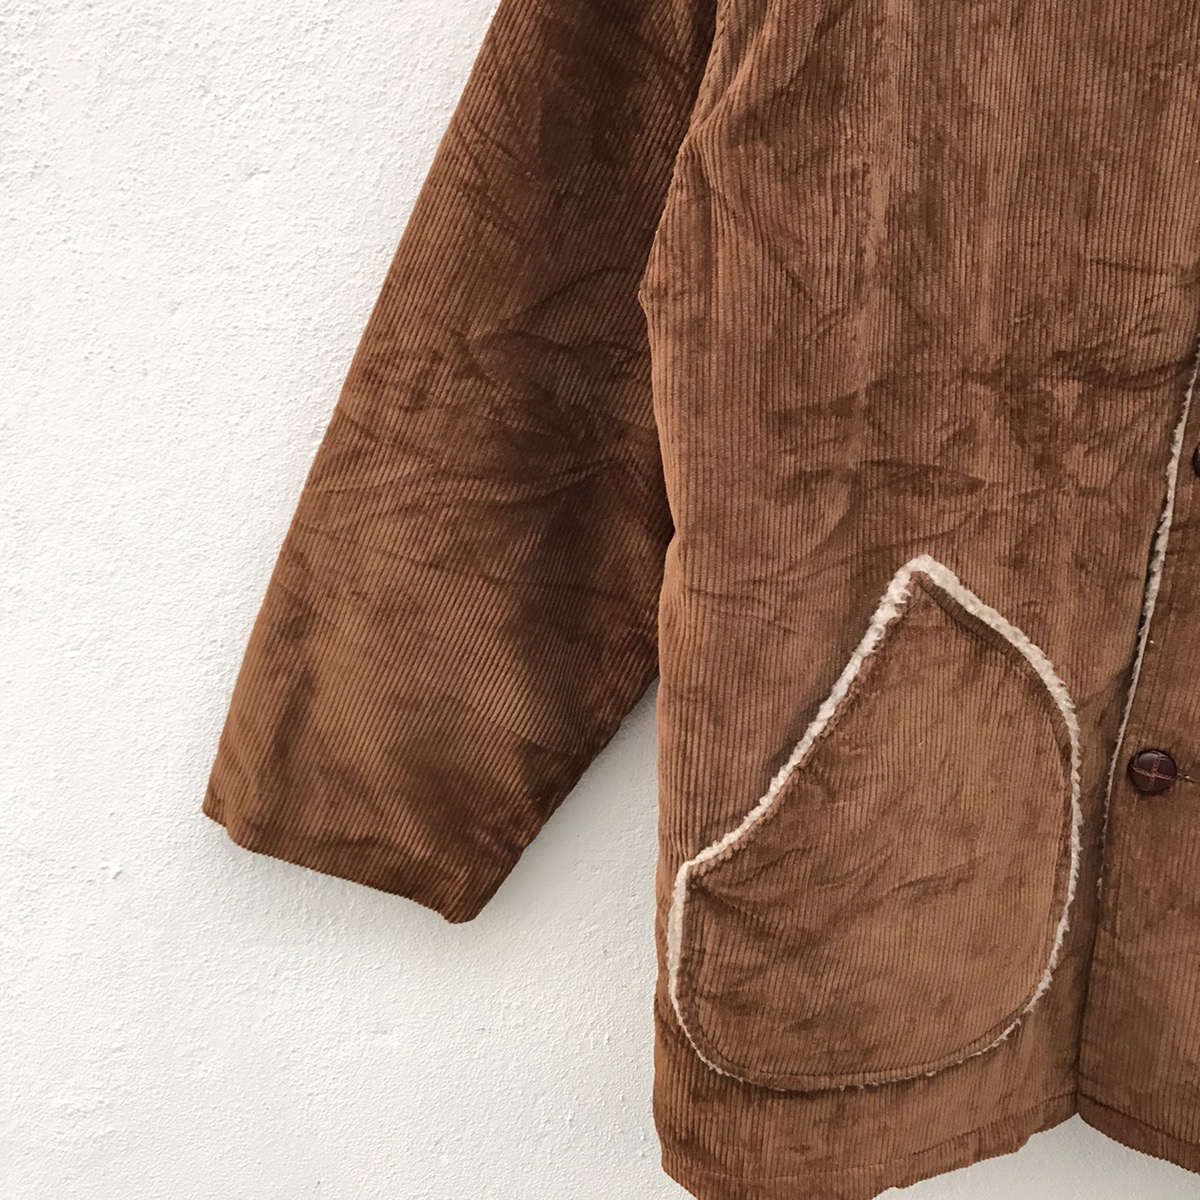 Vintage - Canyon Guide Outfitters Corduroy Jackets - 3